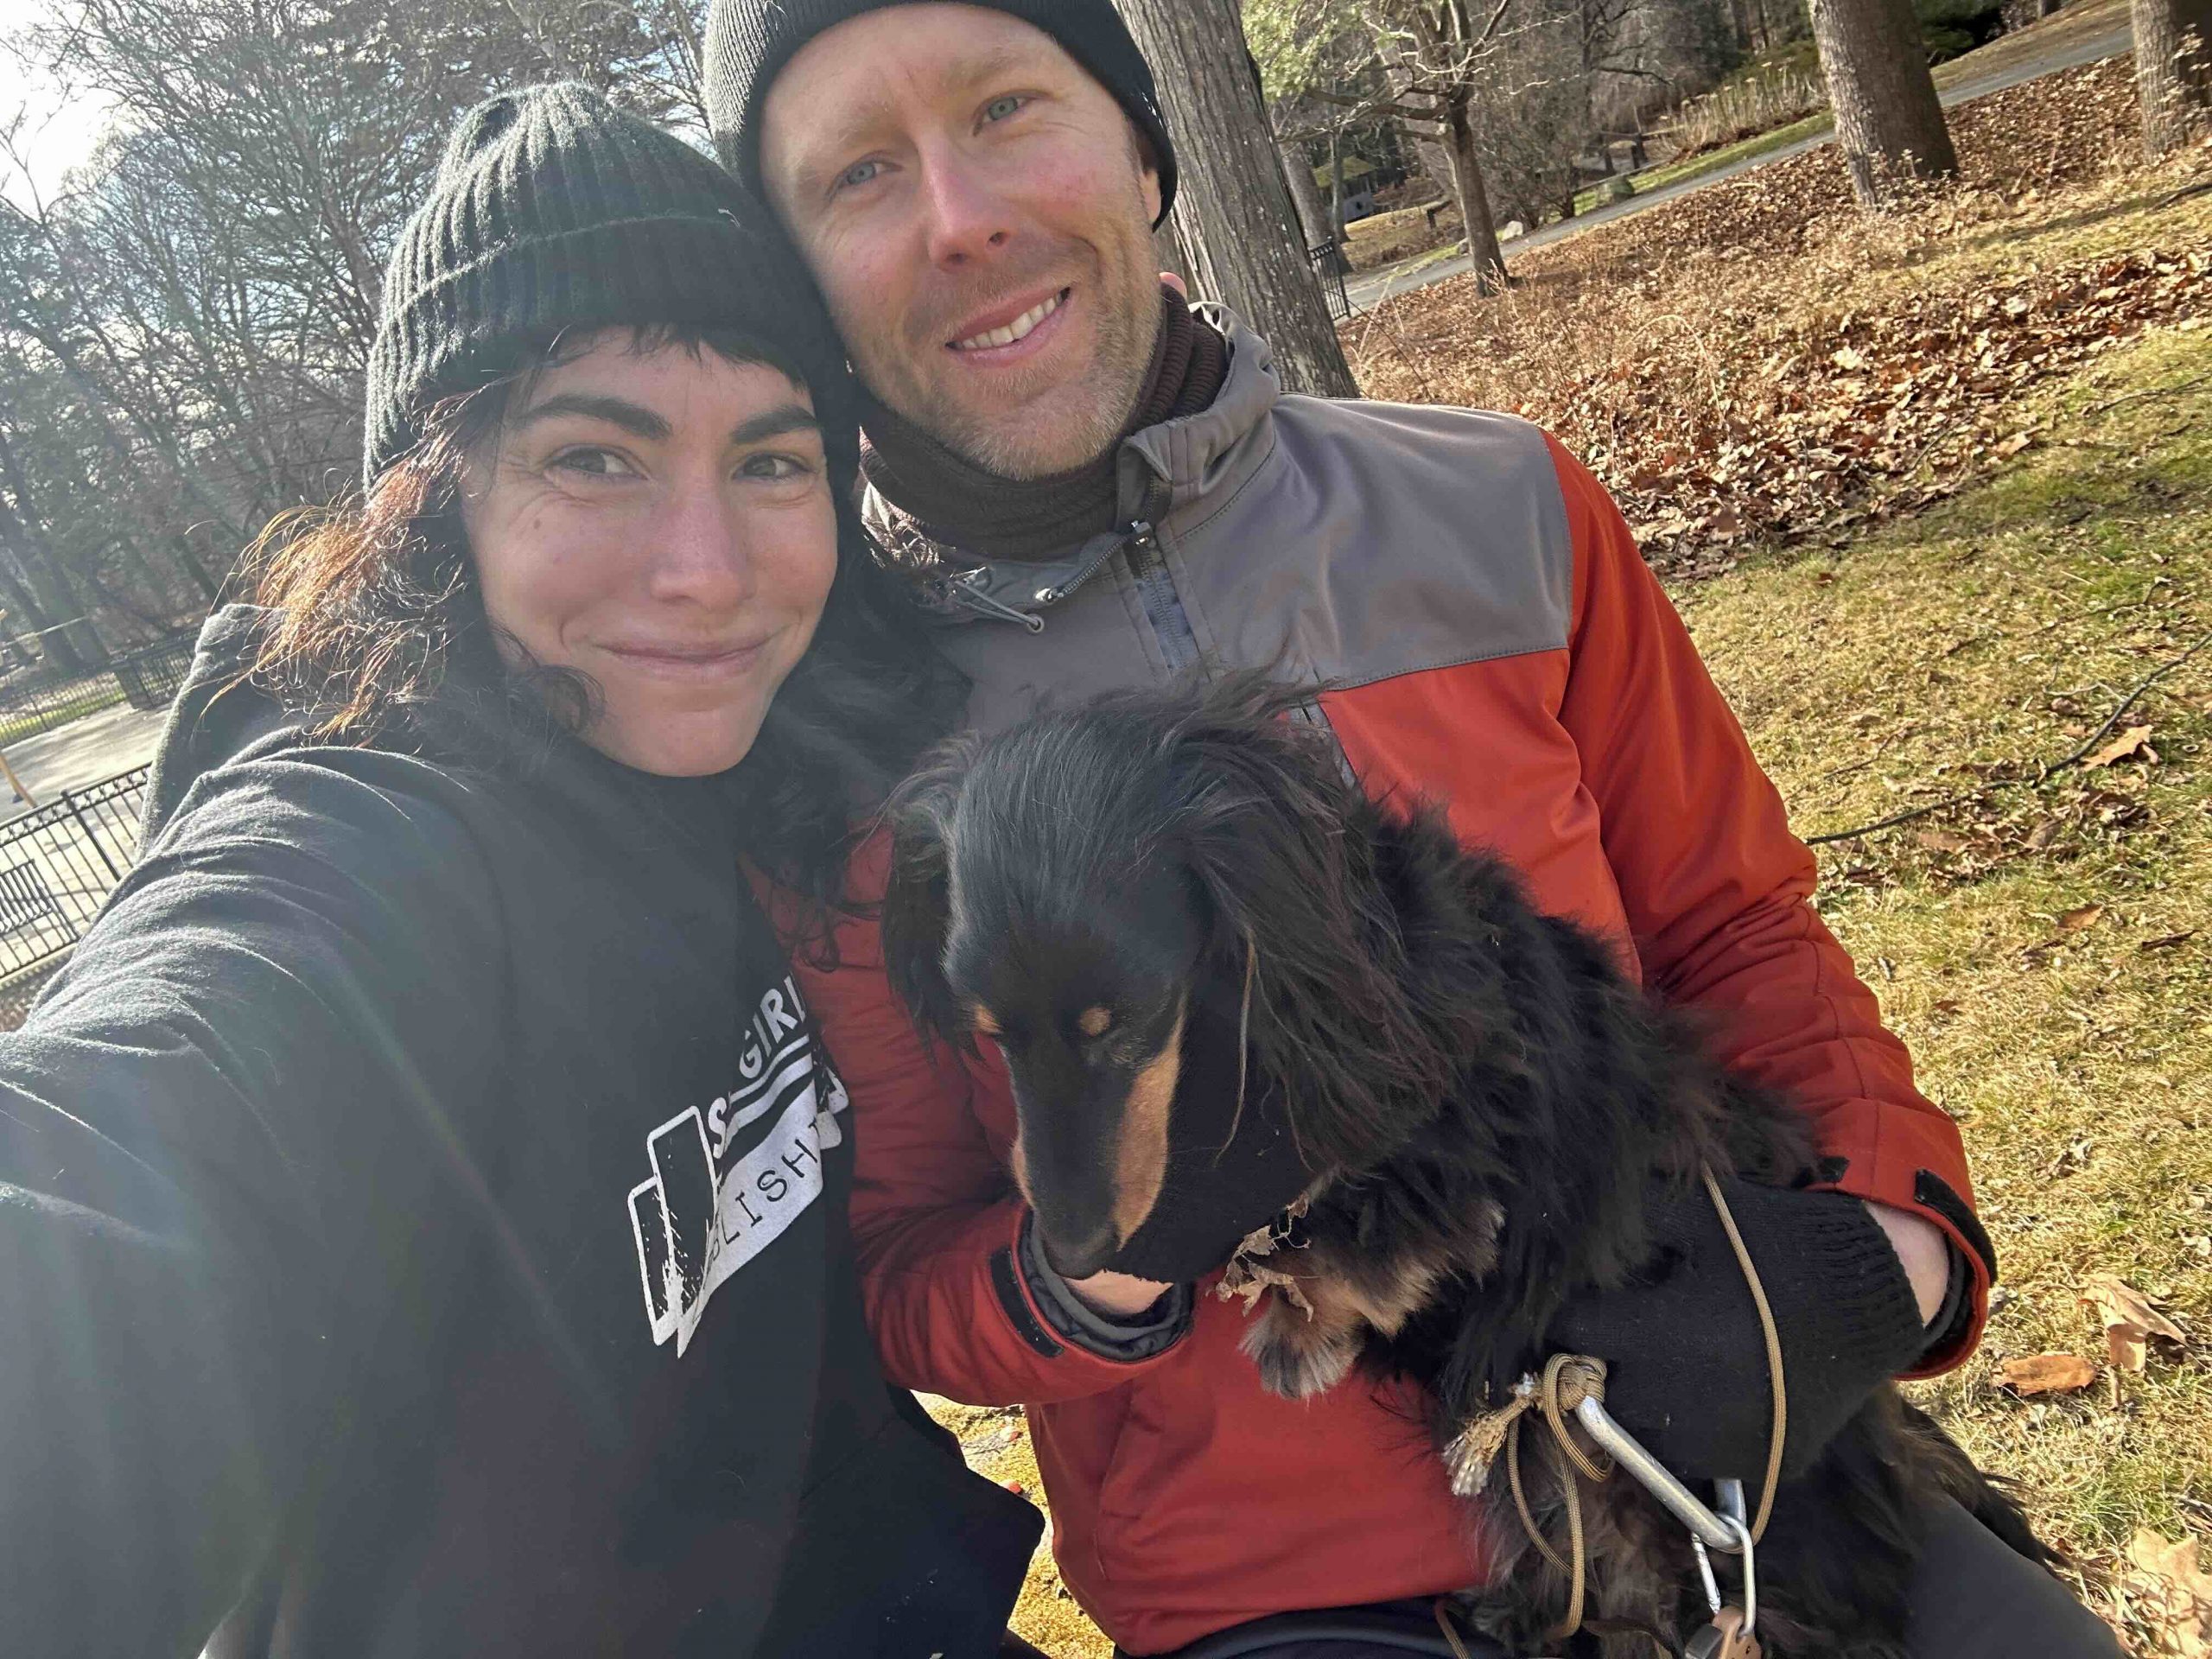 A woman and a man are taking a selfie outdoors while holding a small black dog. They are both wearing beanies, and the man is dressed in a red and gray jacket. The background includes trees and dried leaves on the ground.